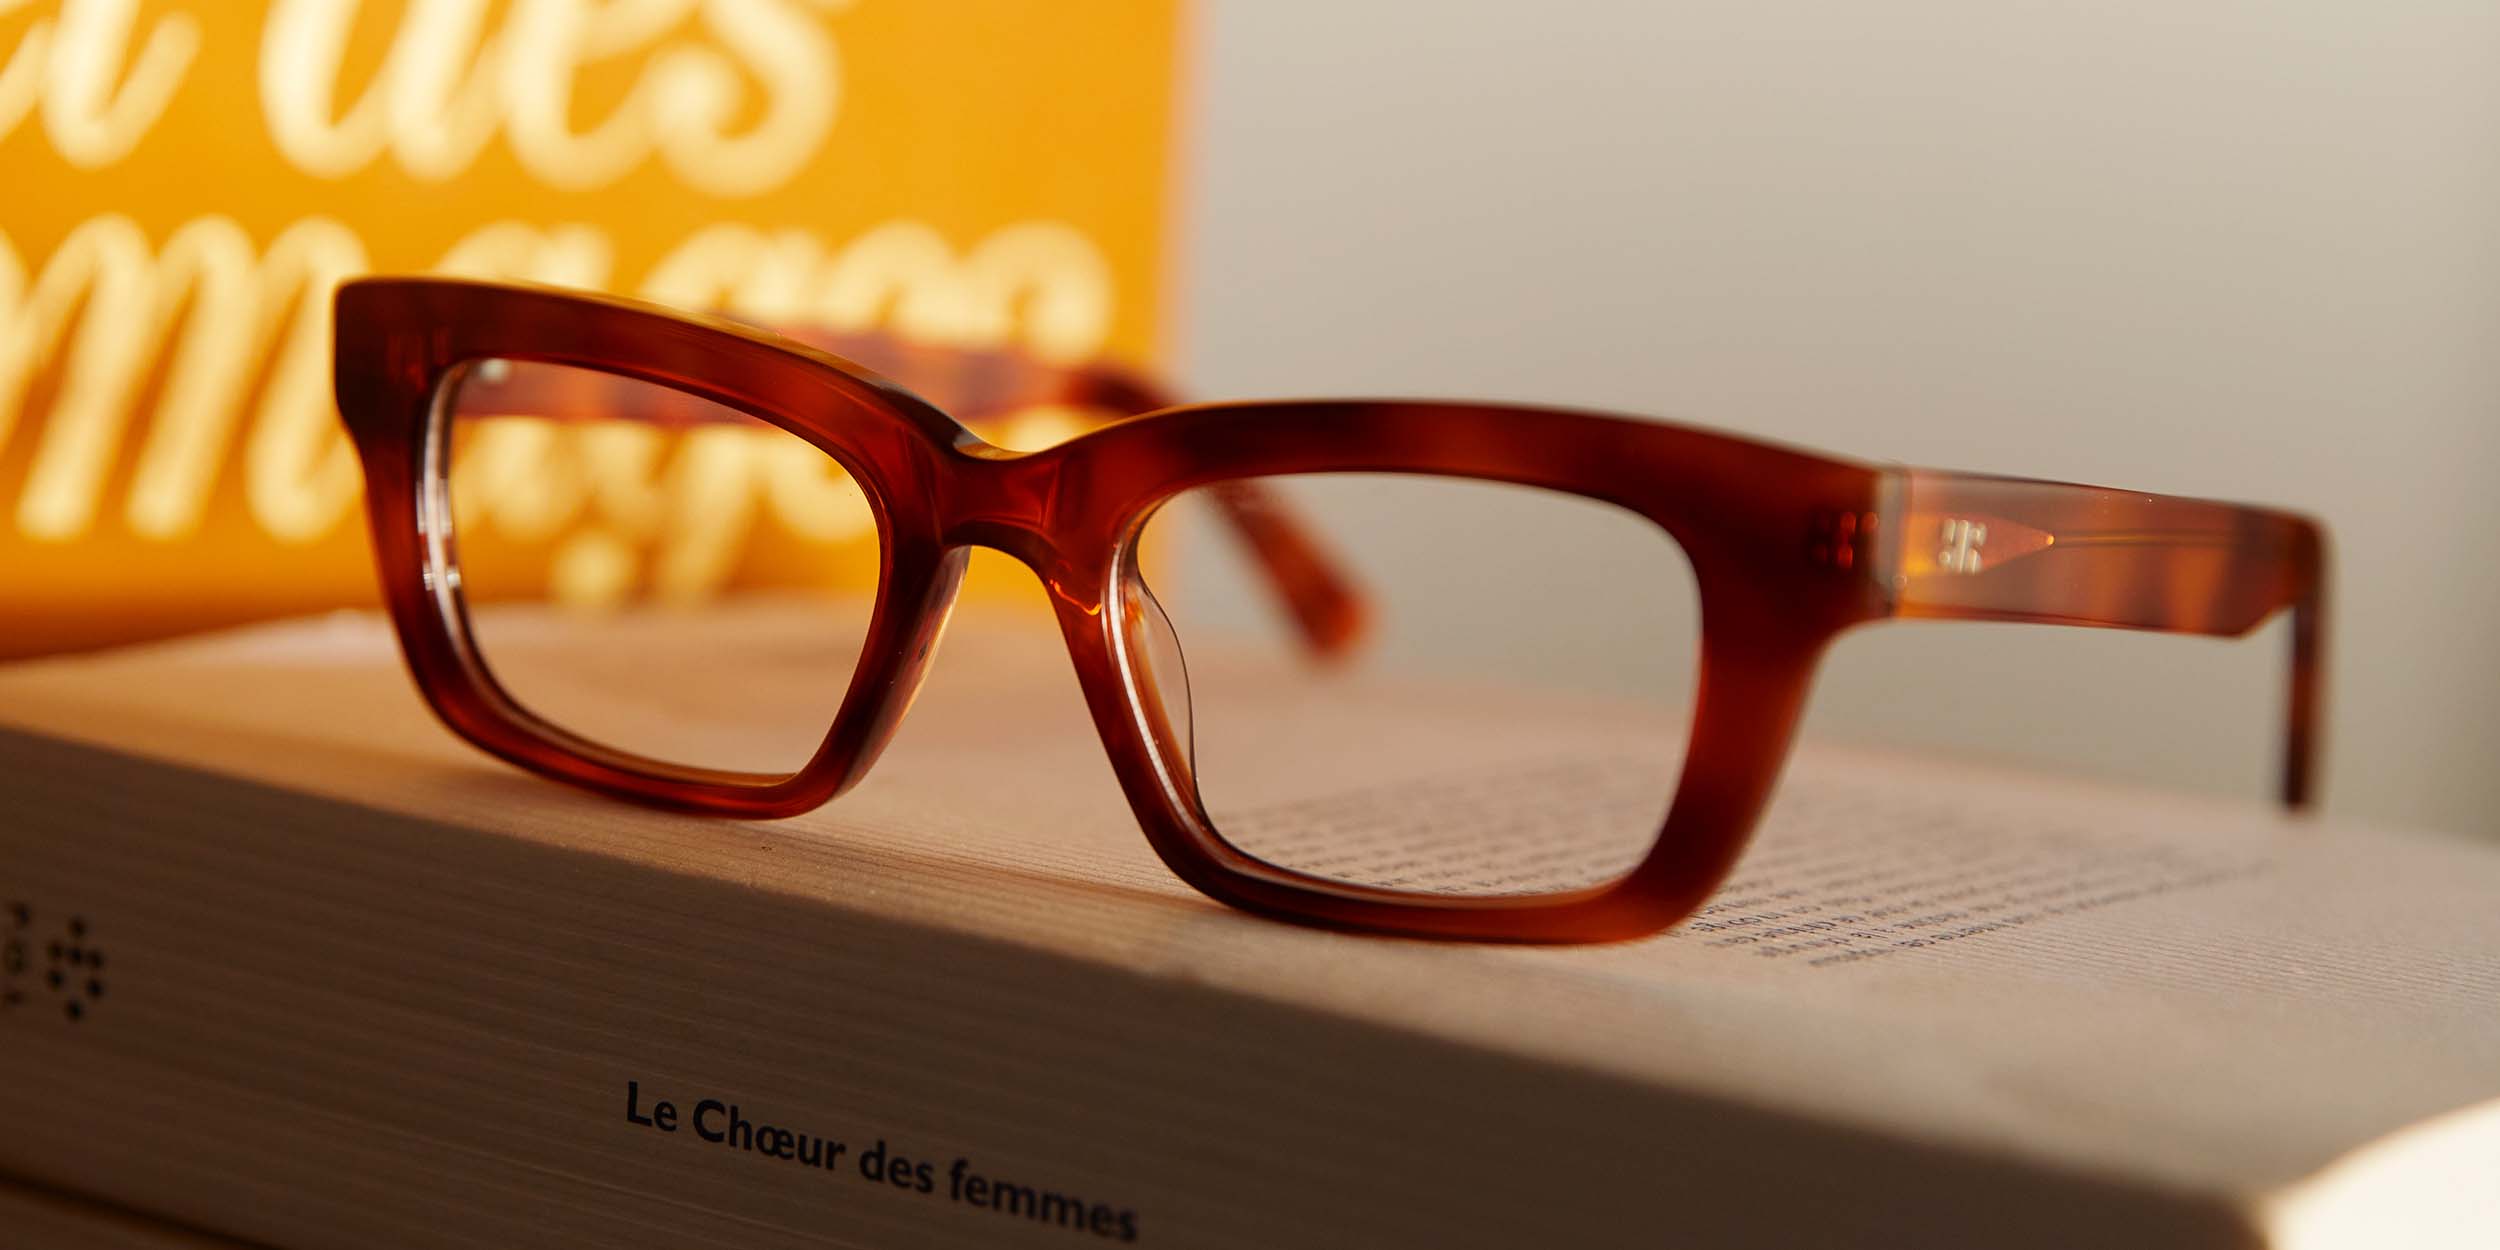 Photo Details of Margot Clear Reading Glasses in a room